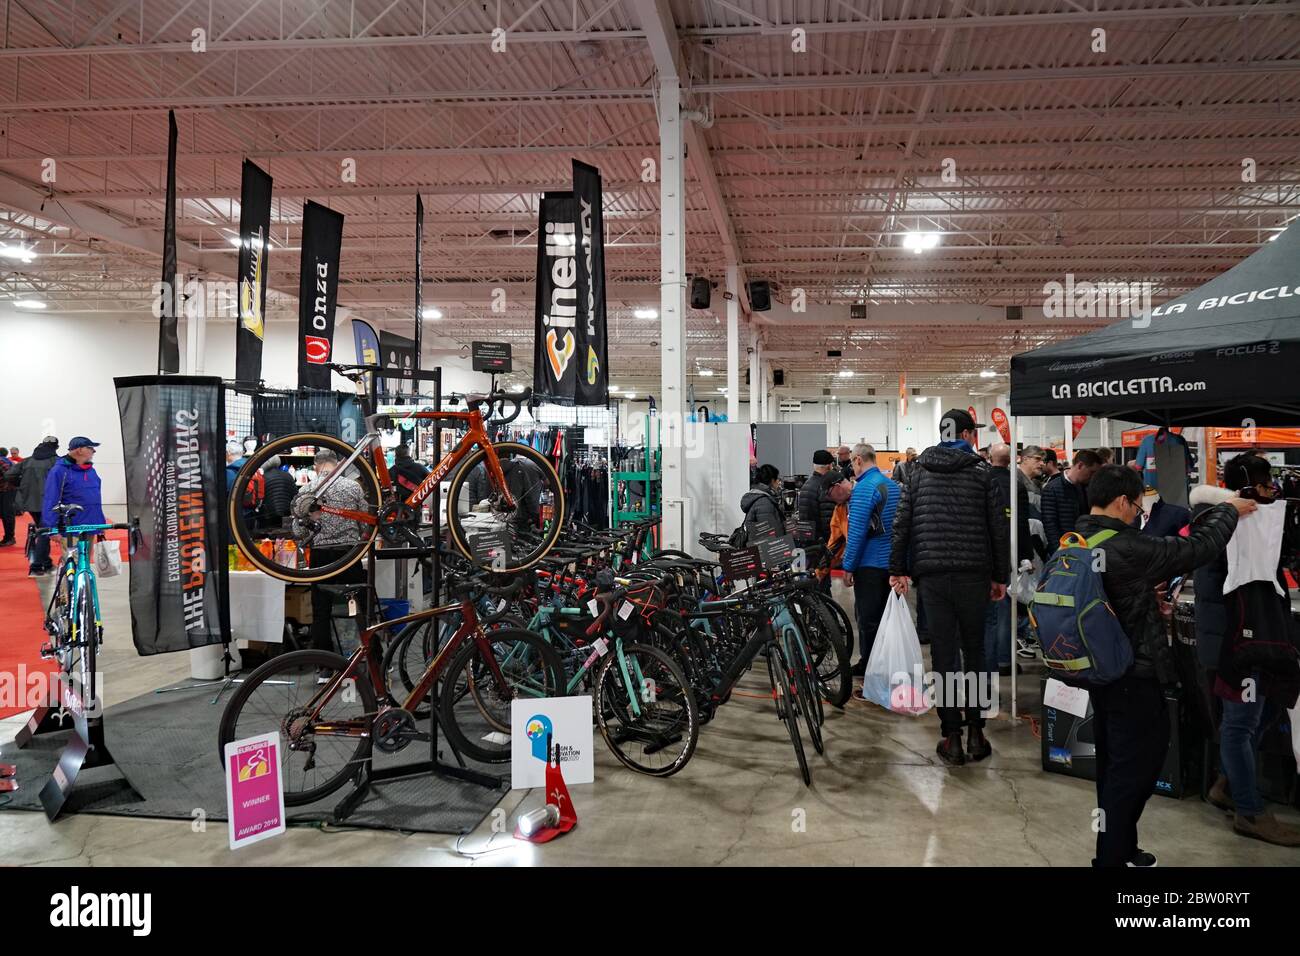 TORONTO - MARCH 6, 2020: Cycling is an increasingly popular form of exercise and bicycle shows offering high end bikes attract large crowds. Stock Photo